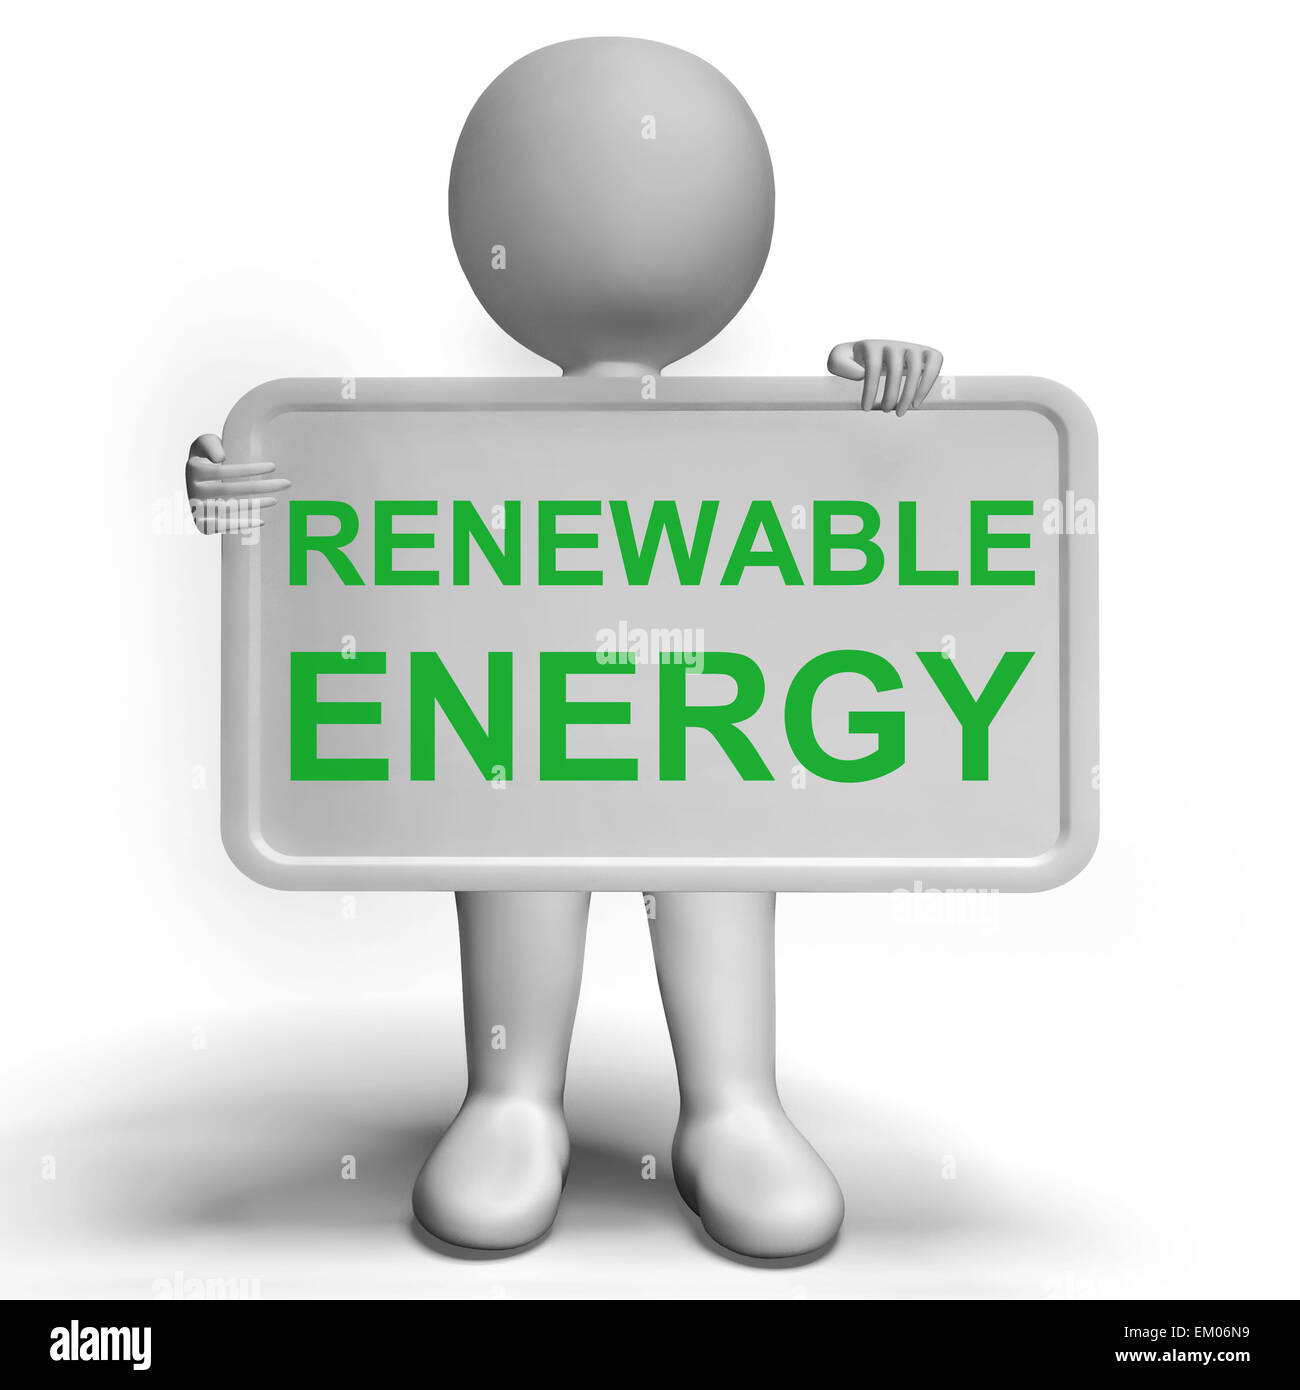 Renewable Energy Sign Showing Recycling Or Reuse Stock Photo